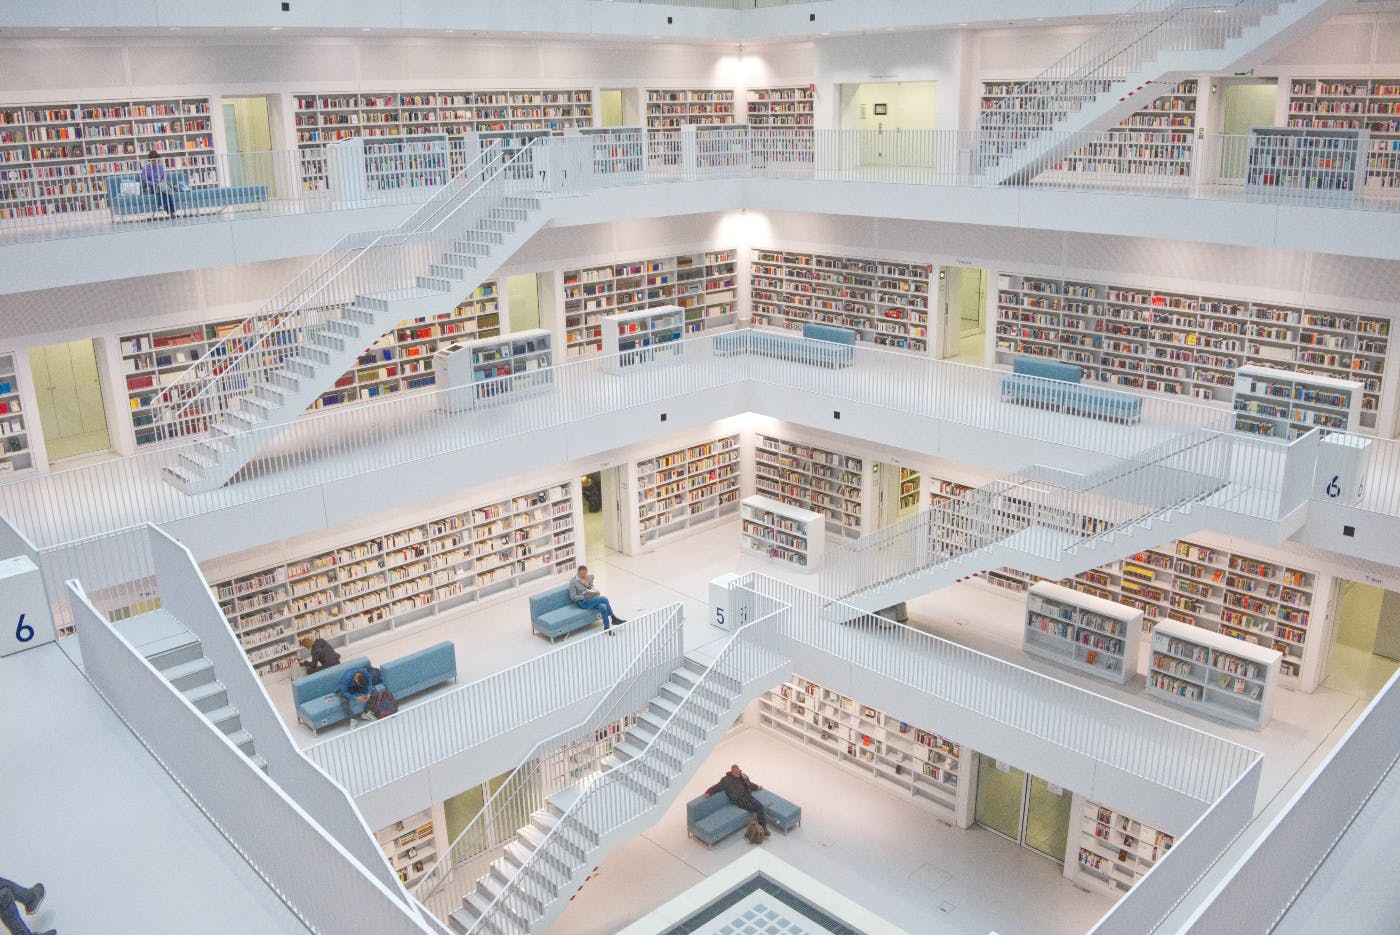 Many floors of a library all in white.